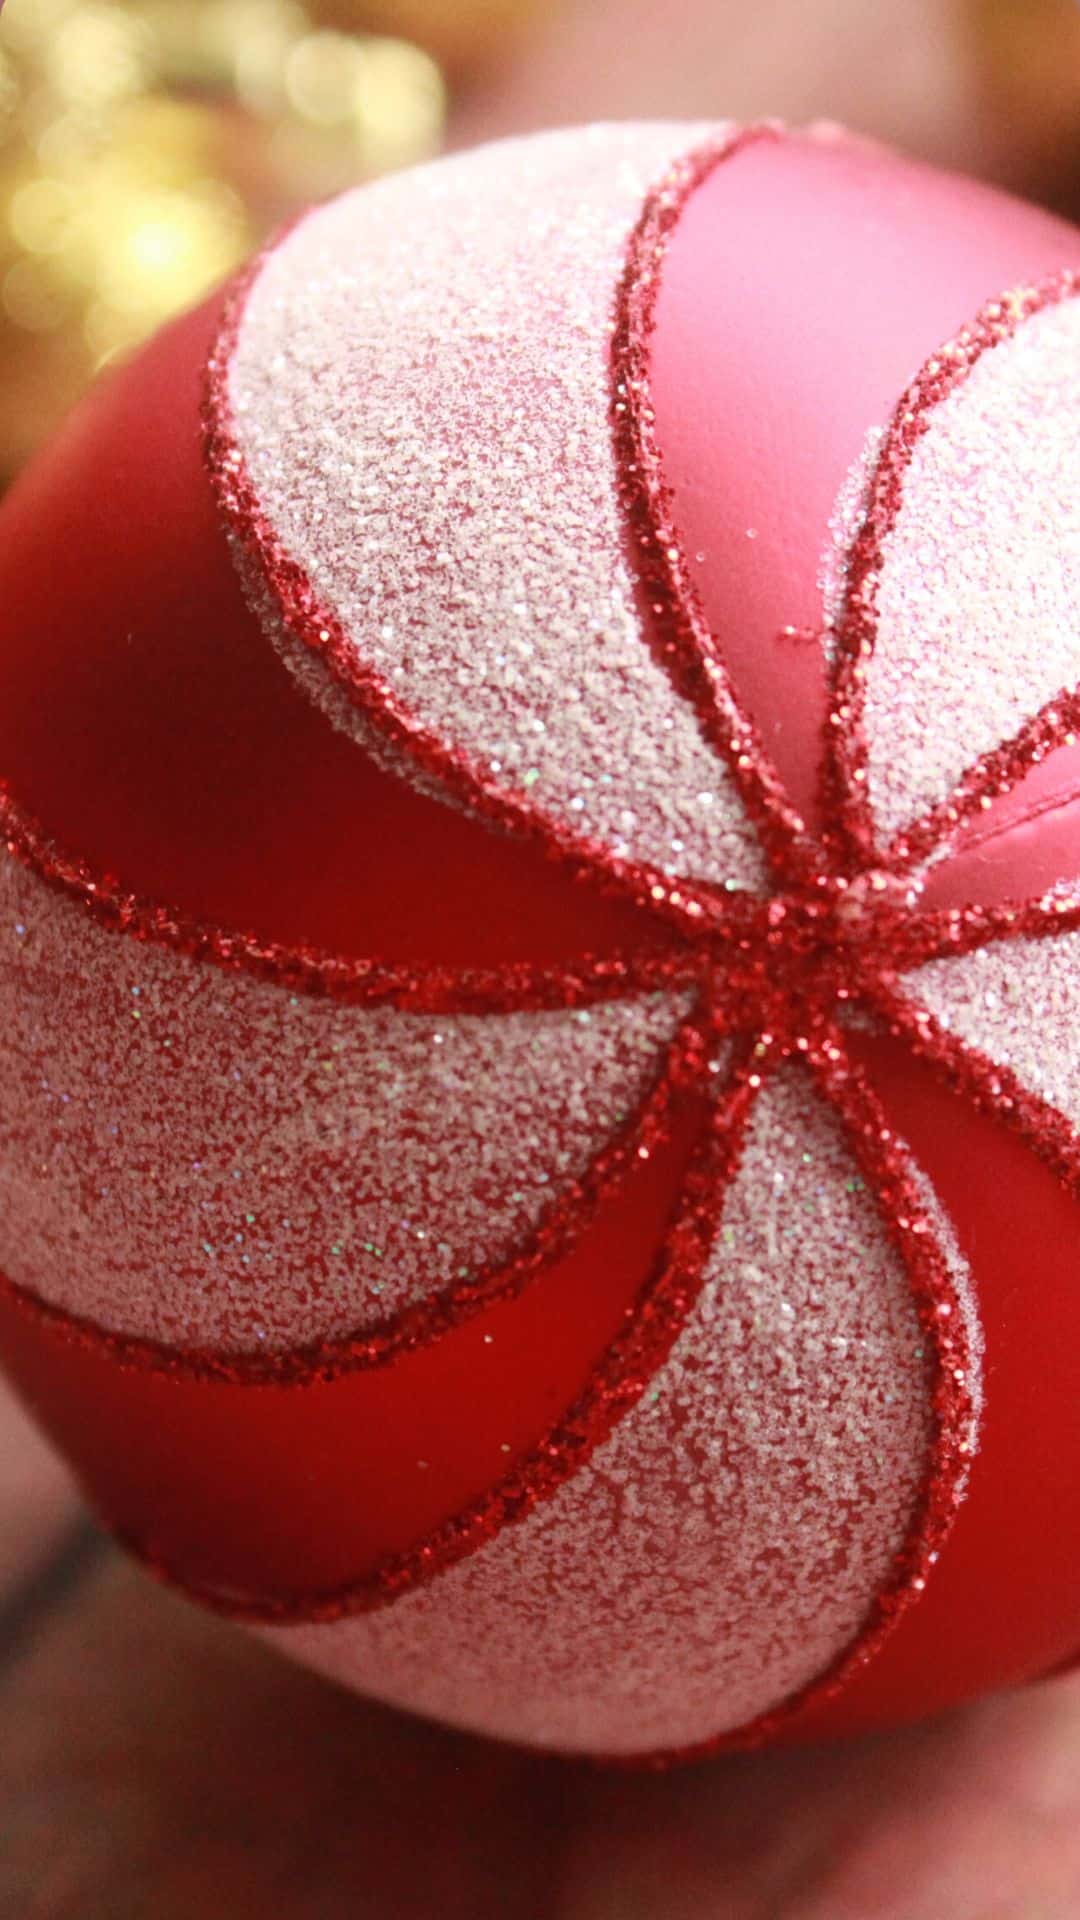 IPhone wallpaper with a red and white Christmas ball - Christmas iPhone